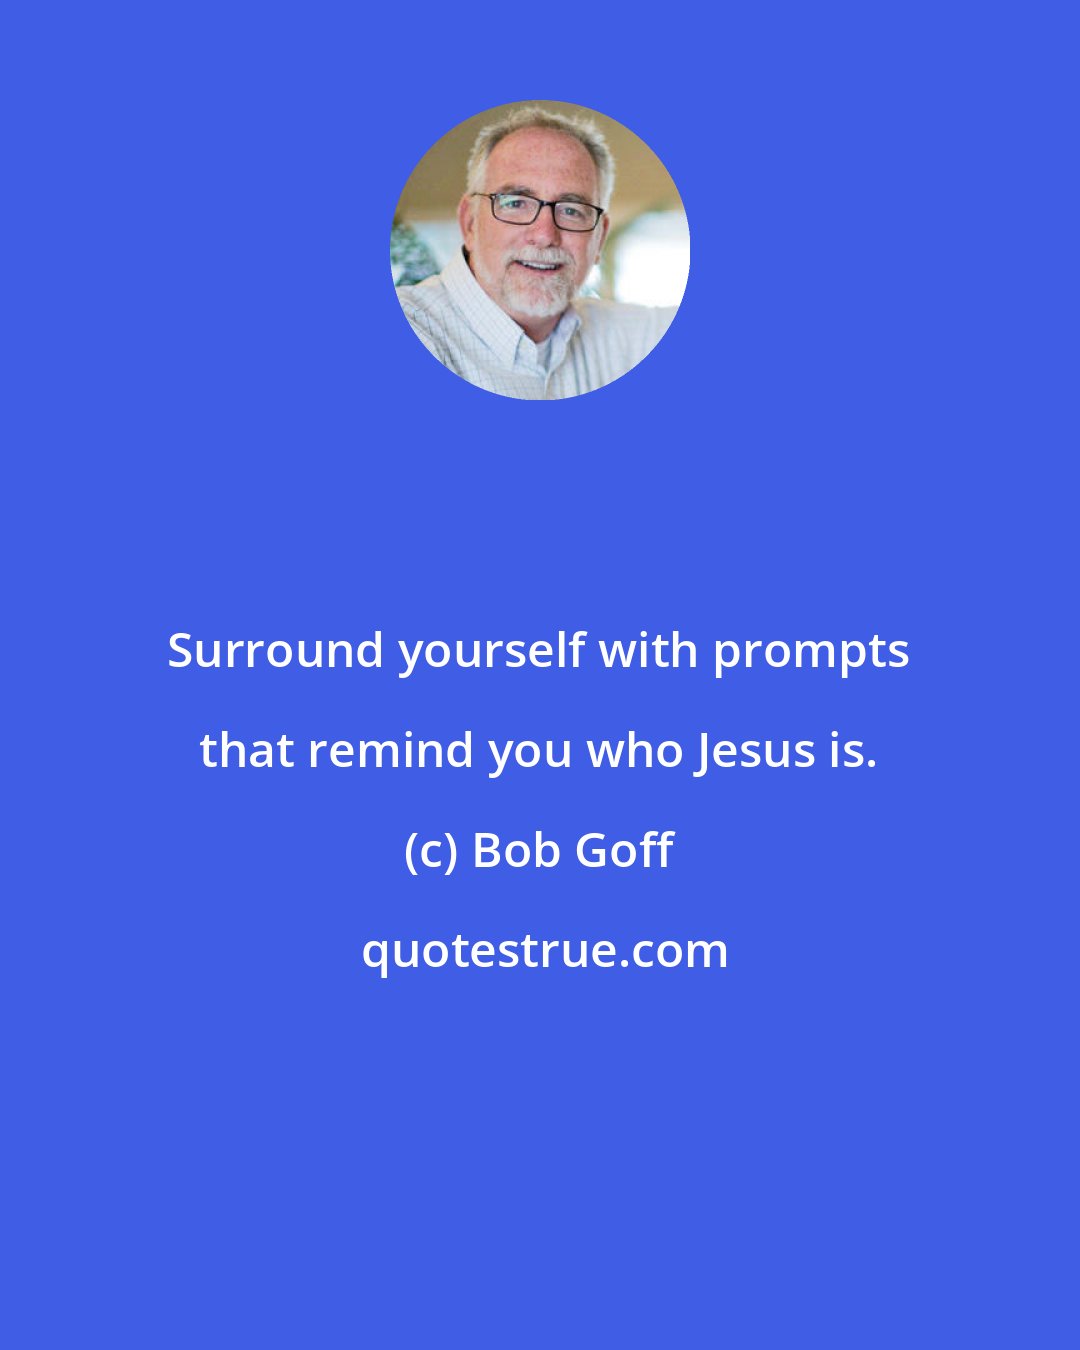 Bob Goff: Surround yourself with prompts that remind you who Jesus is.